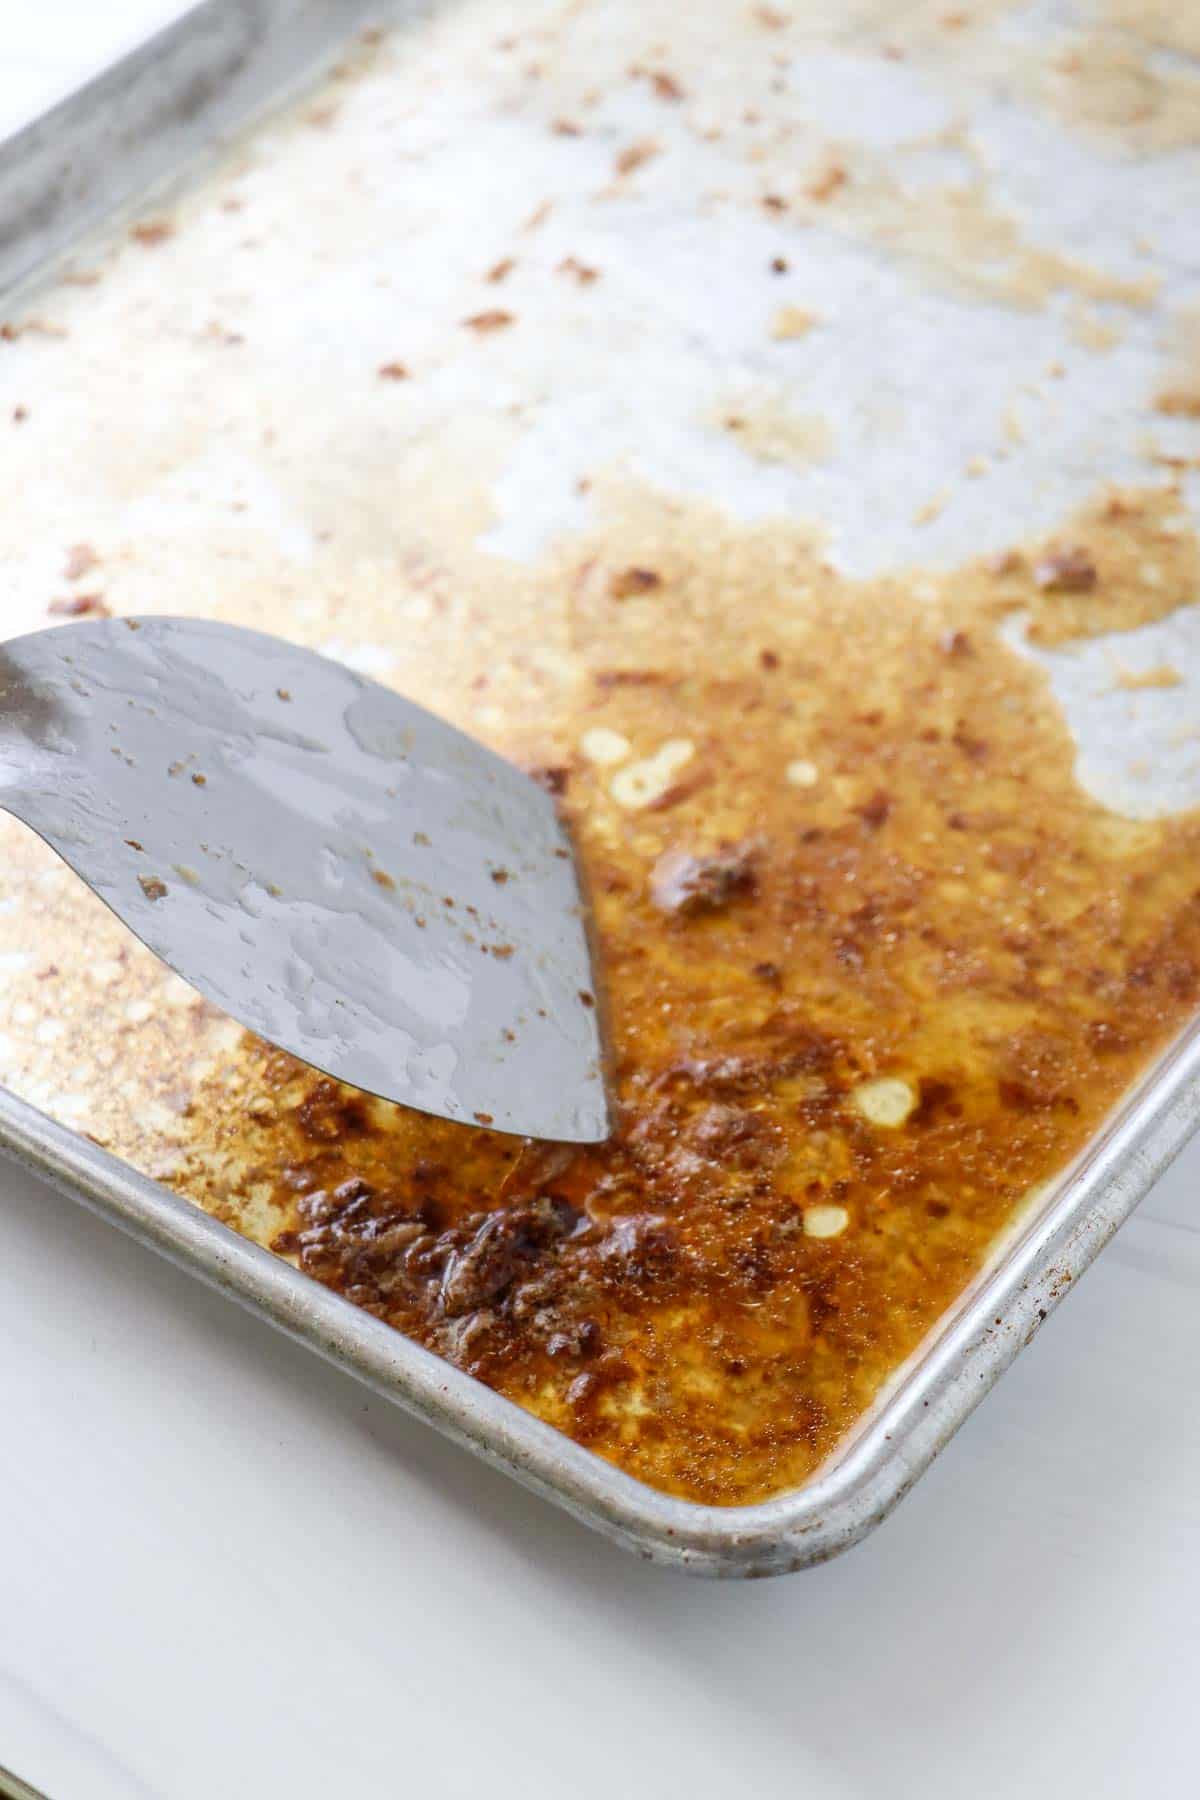 Baking sheet with brown bits and a metal spatula.